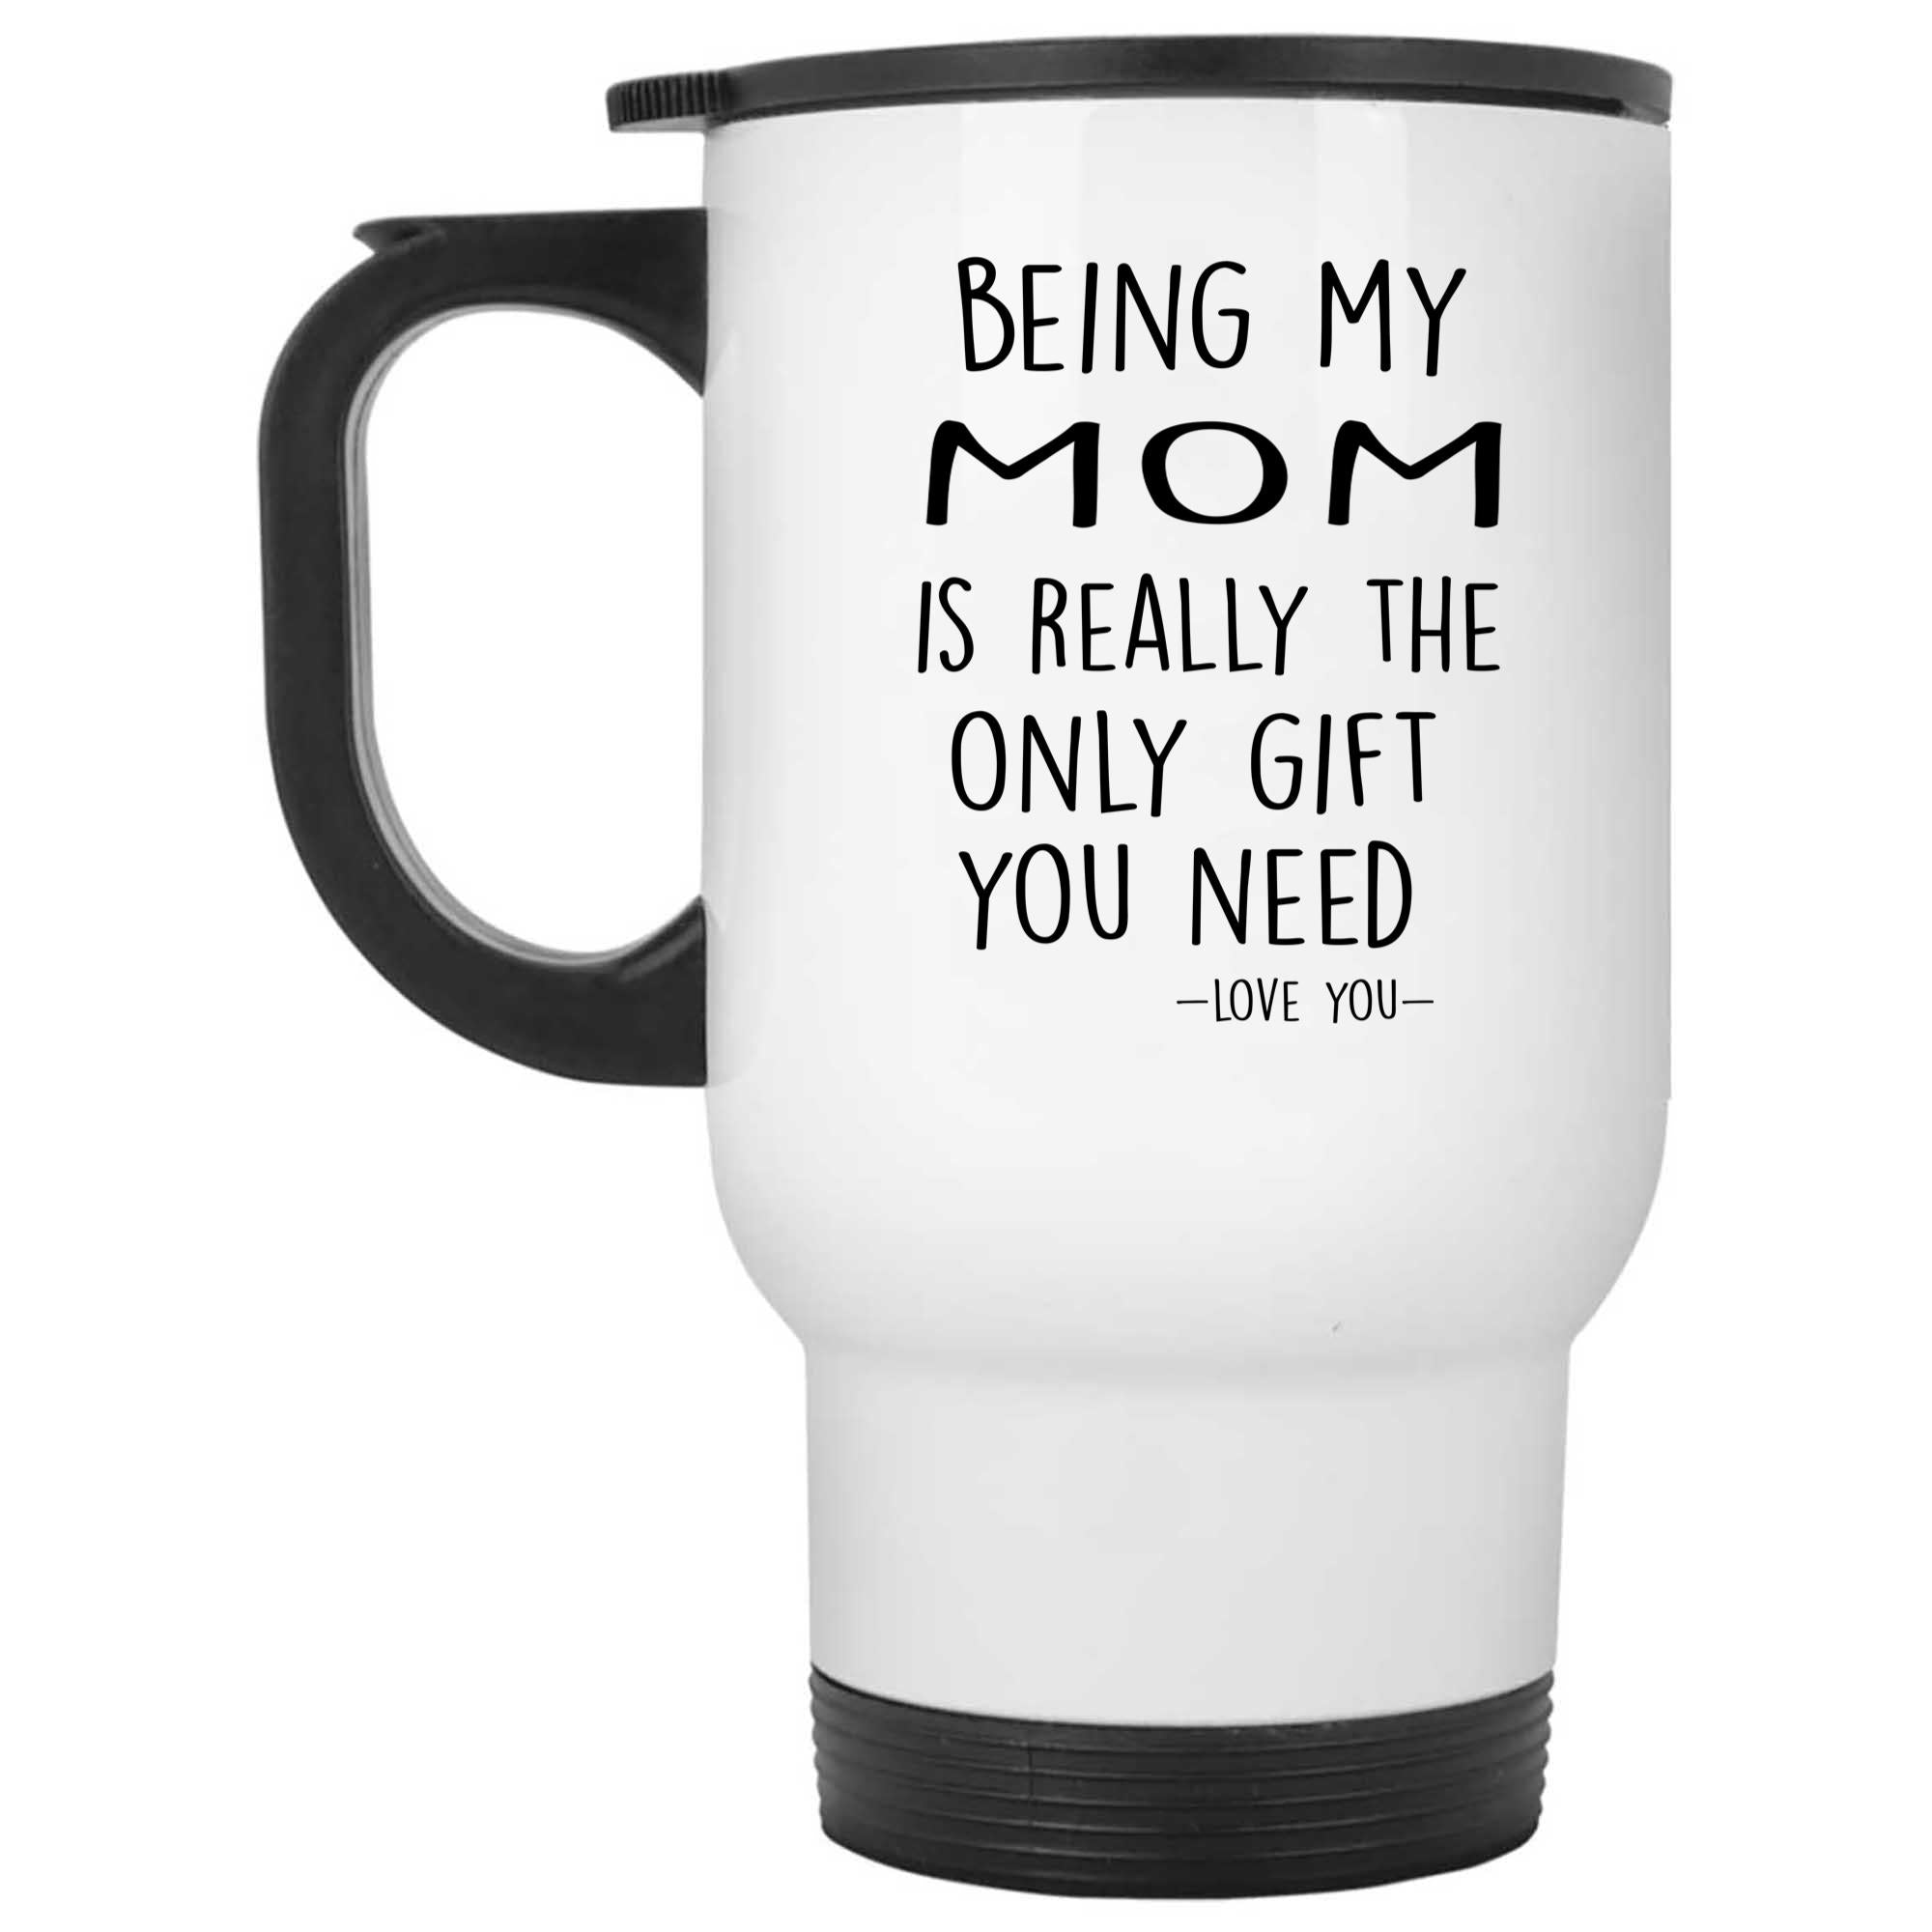 Skitongifts Funny Ceramic Novelty Coffee Mug Being My Mom Is Really The Only Gift You Need - Love You Mom Funny Gift GtKHHMh